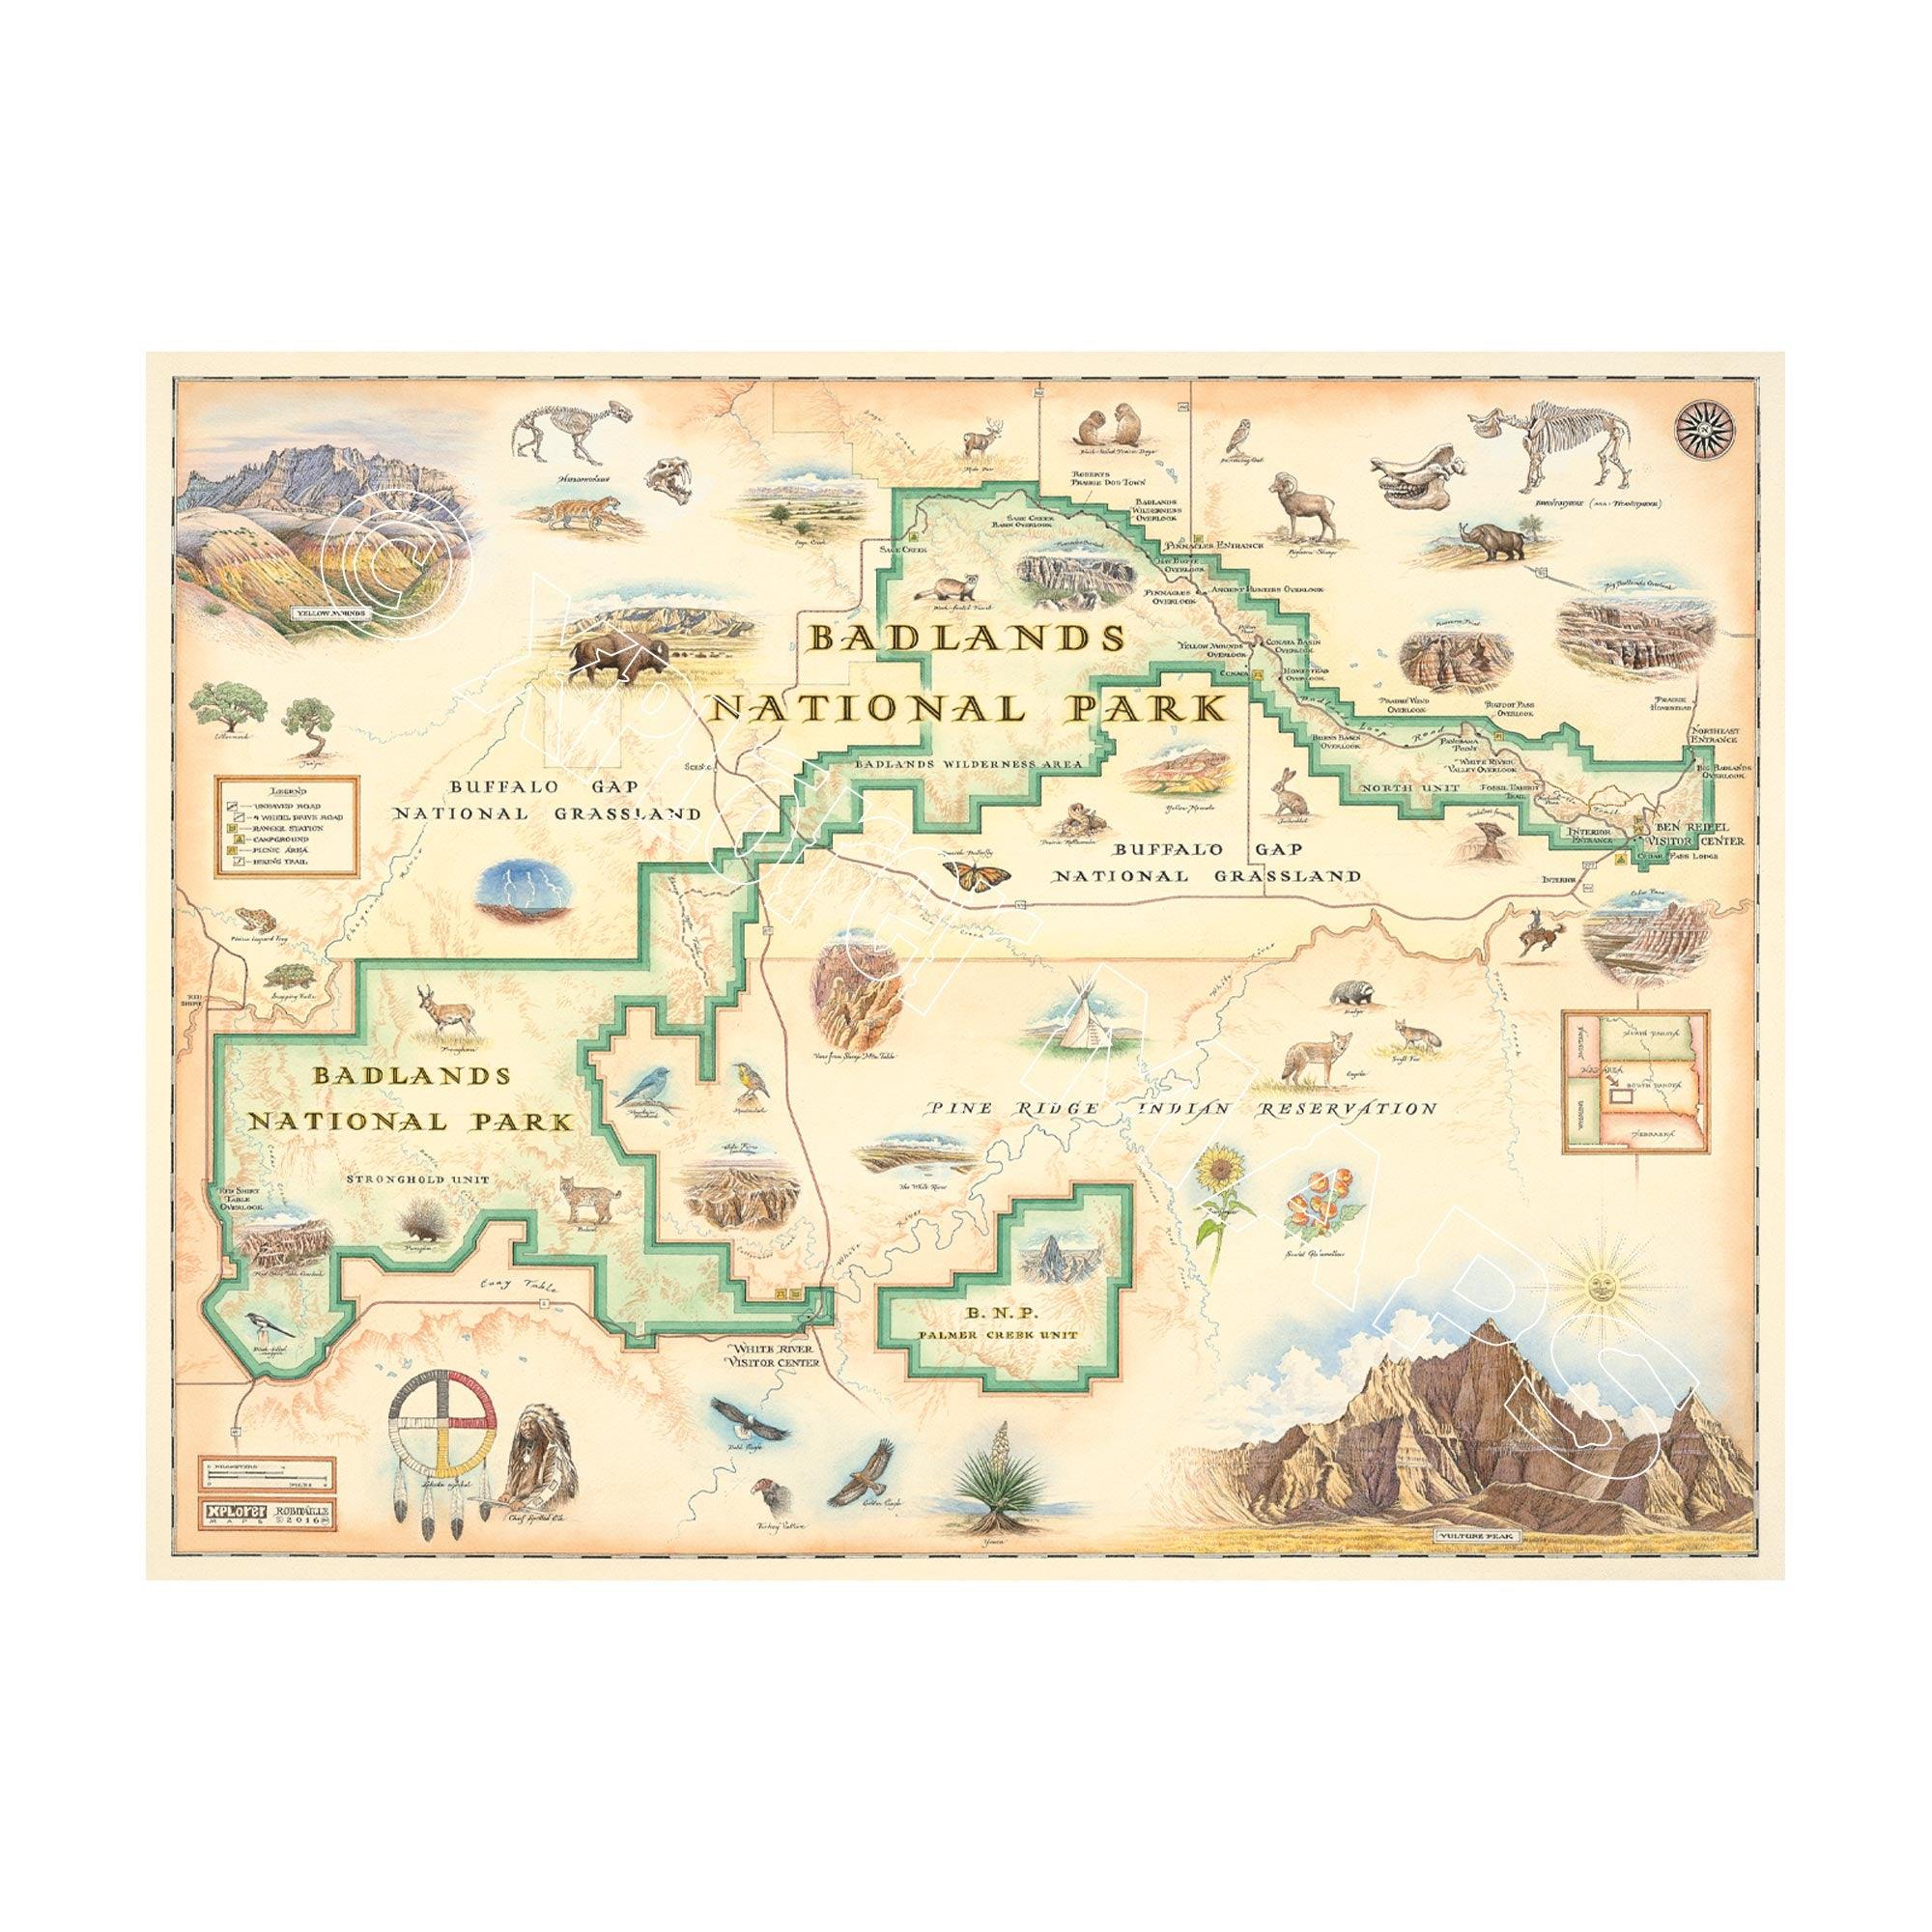 Badlands National Park hand-drawn map in earth-tone colors of browns and reds. It features Buffalo Gap Grasslands, Vulture Peak, and Yellow Mounds Overlook. Flora and fauna of Jasper Tree, Yucca plant, deer, dinosaurs, birds, and fox. Measures 24x18.